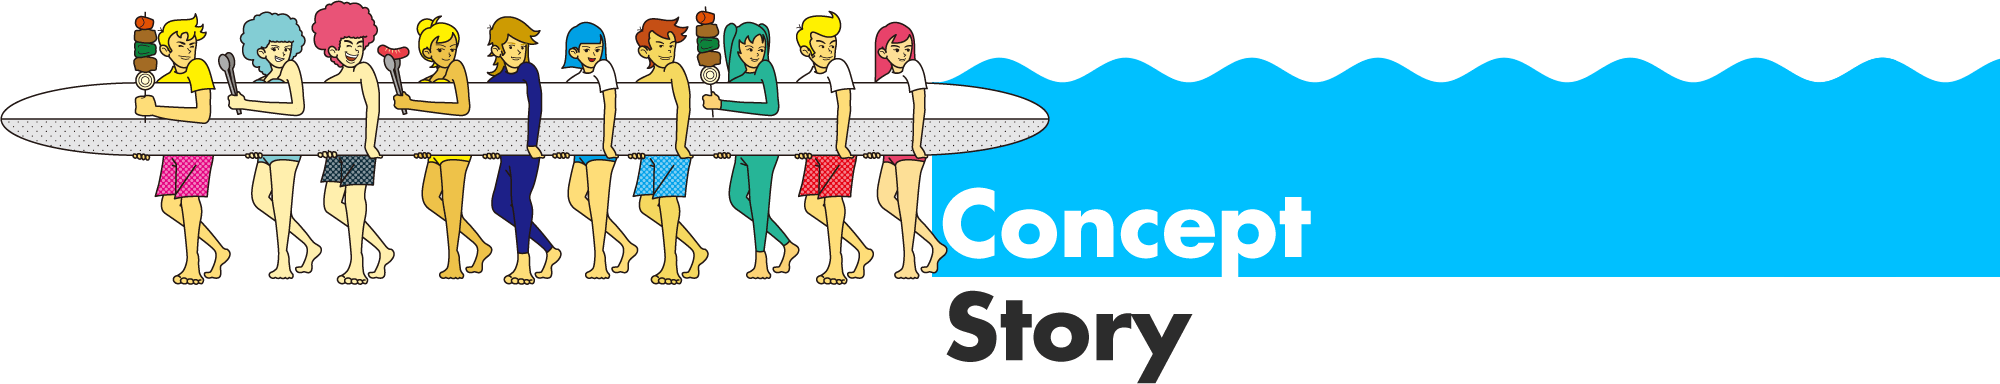 Concept Story